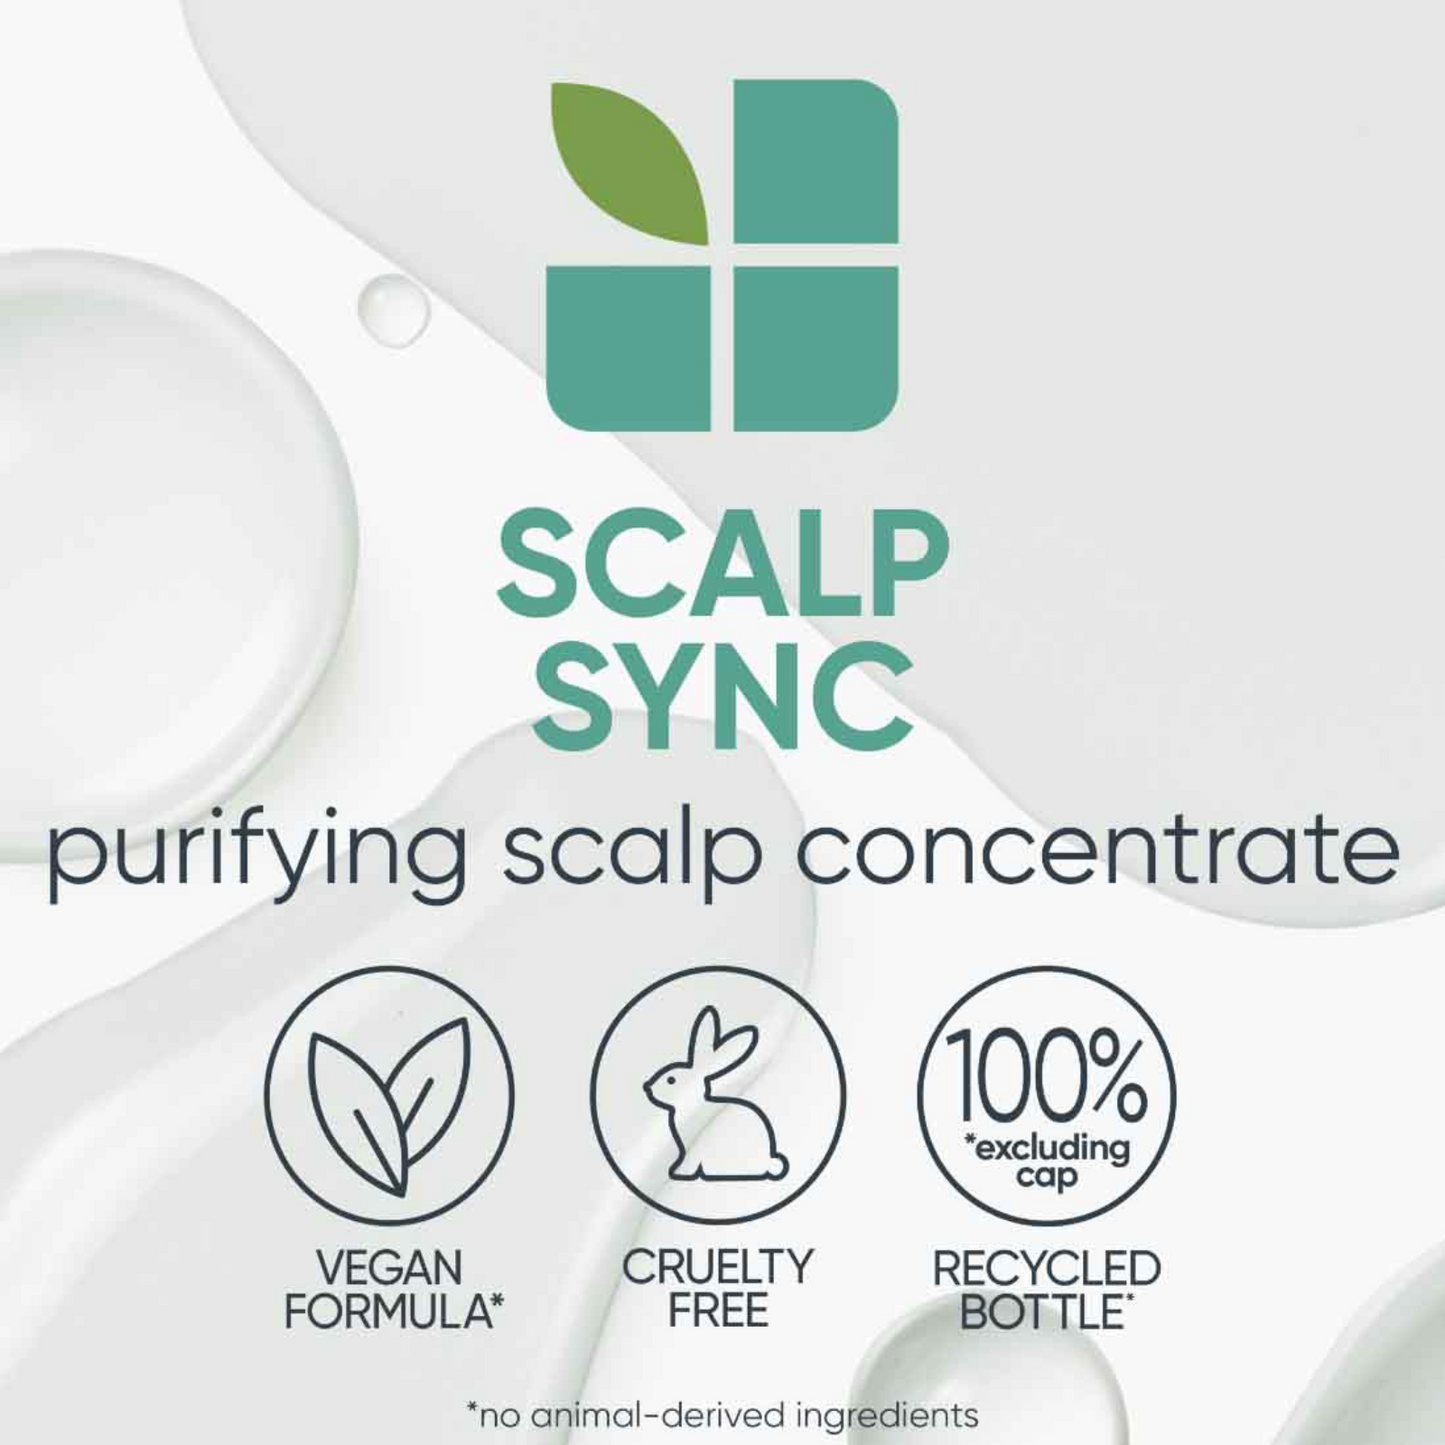 Biolage - Scalp Sync Purifying Scalp Concentrate